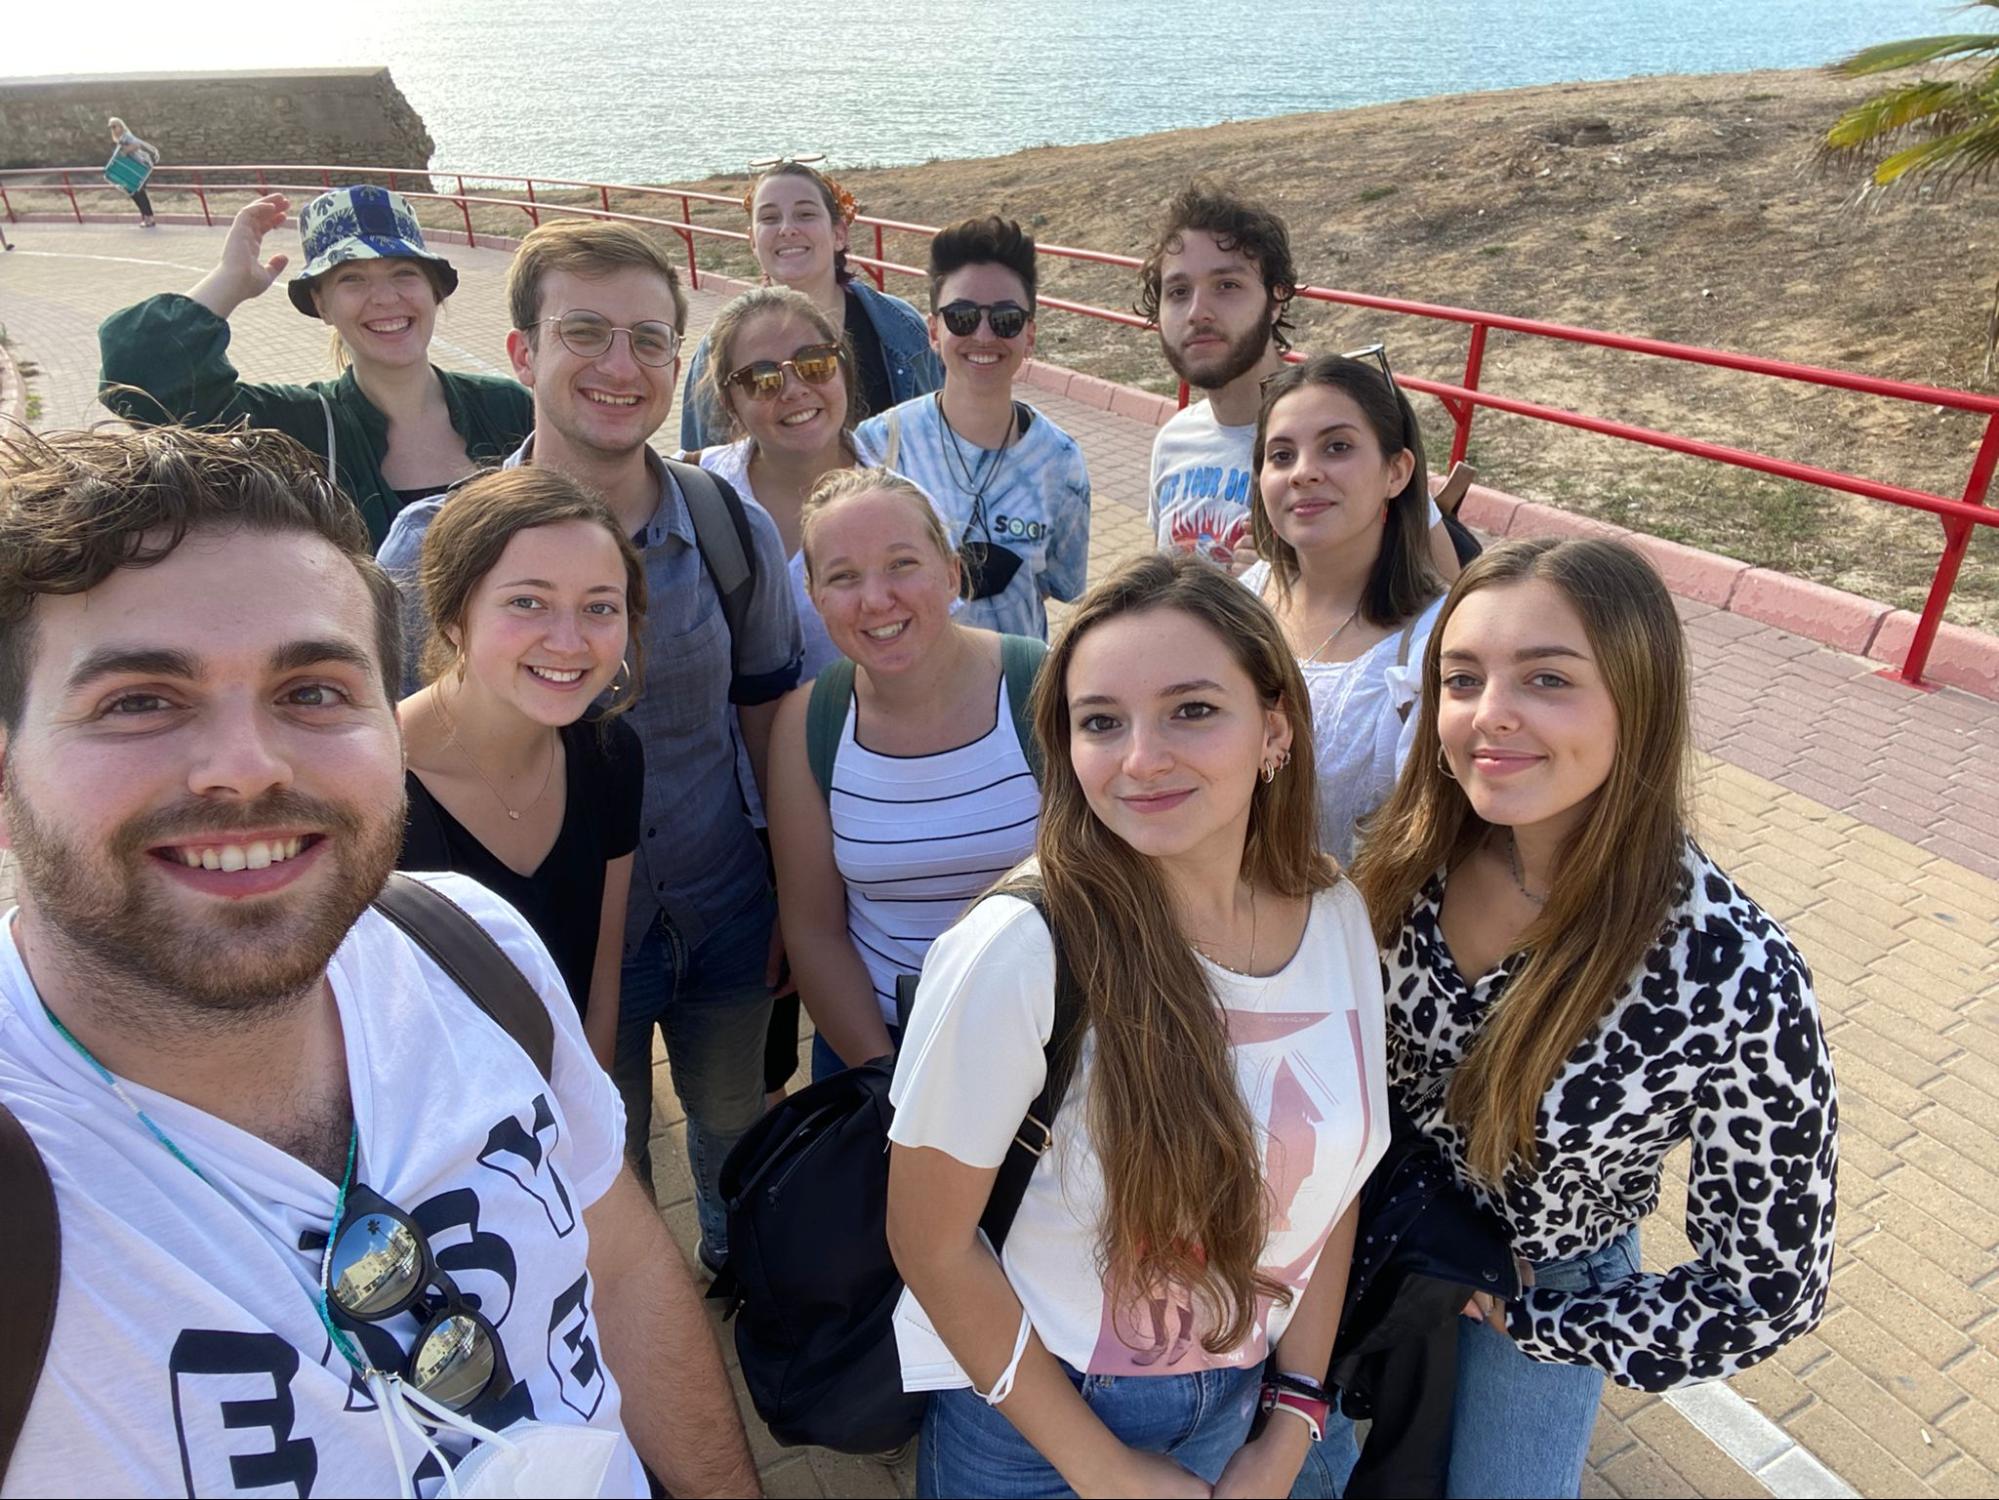 Alandis students meet locals and create lasting relationships